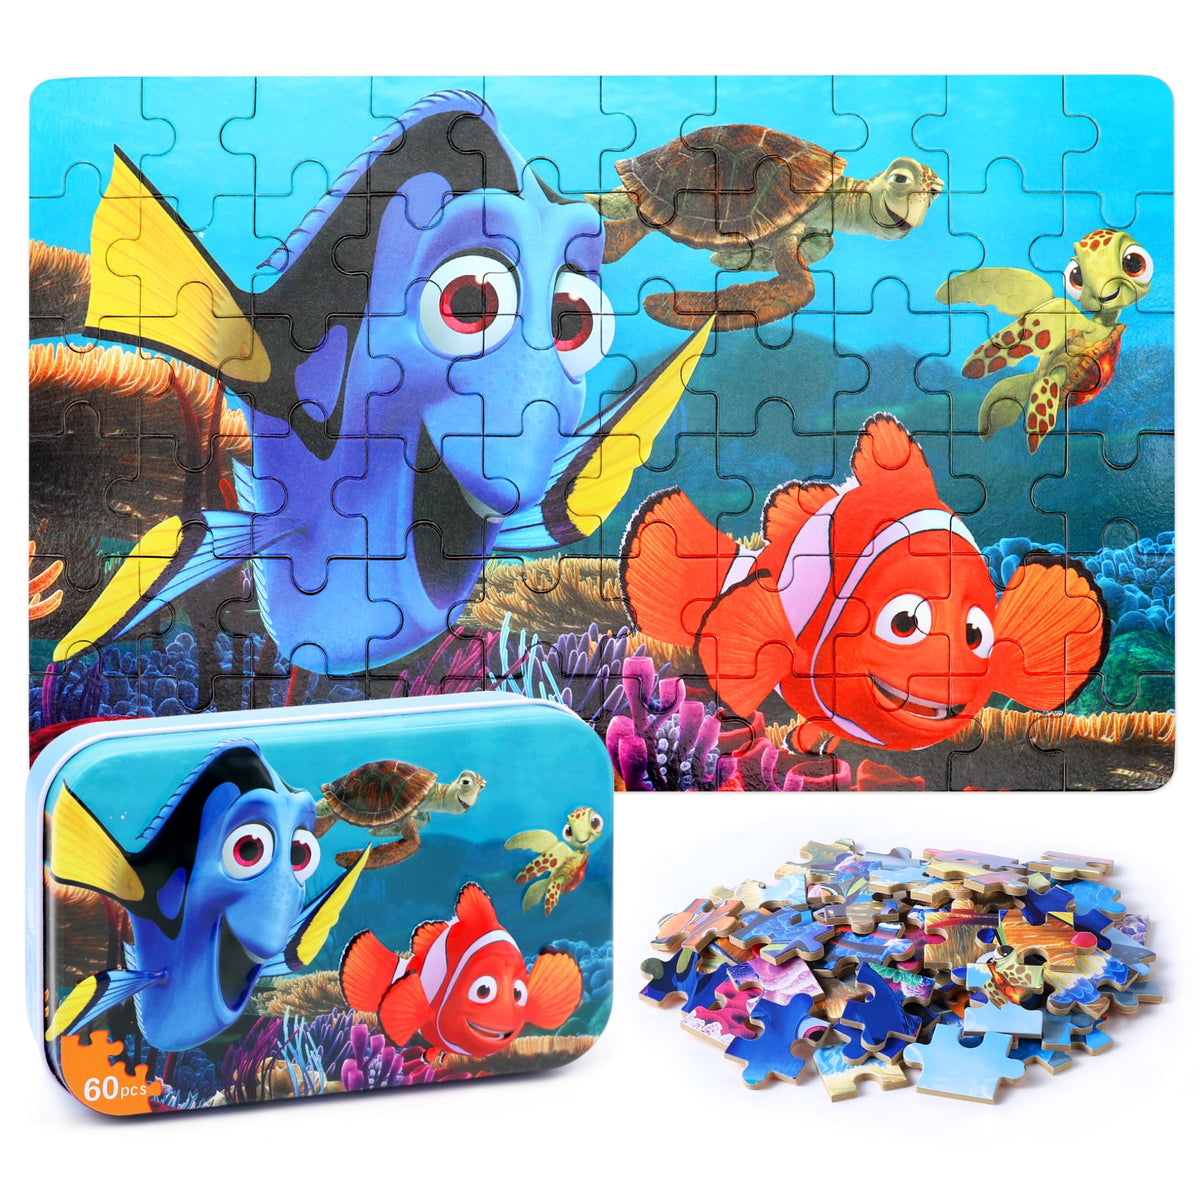 LELEMON Ocean Puzzles for Kids Ages 4-8,Underwater World 60 Piece Puzzles for Kids Ages 3-5,Children Jigsaw Puzzles Kids Puzzles in a Metal Box,Educational Learning Puzzle Toys for Girls and Boys